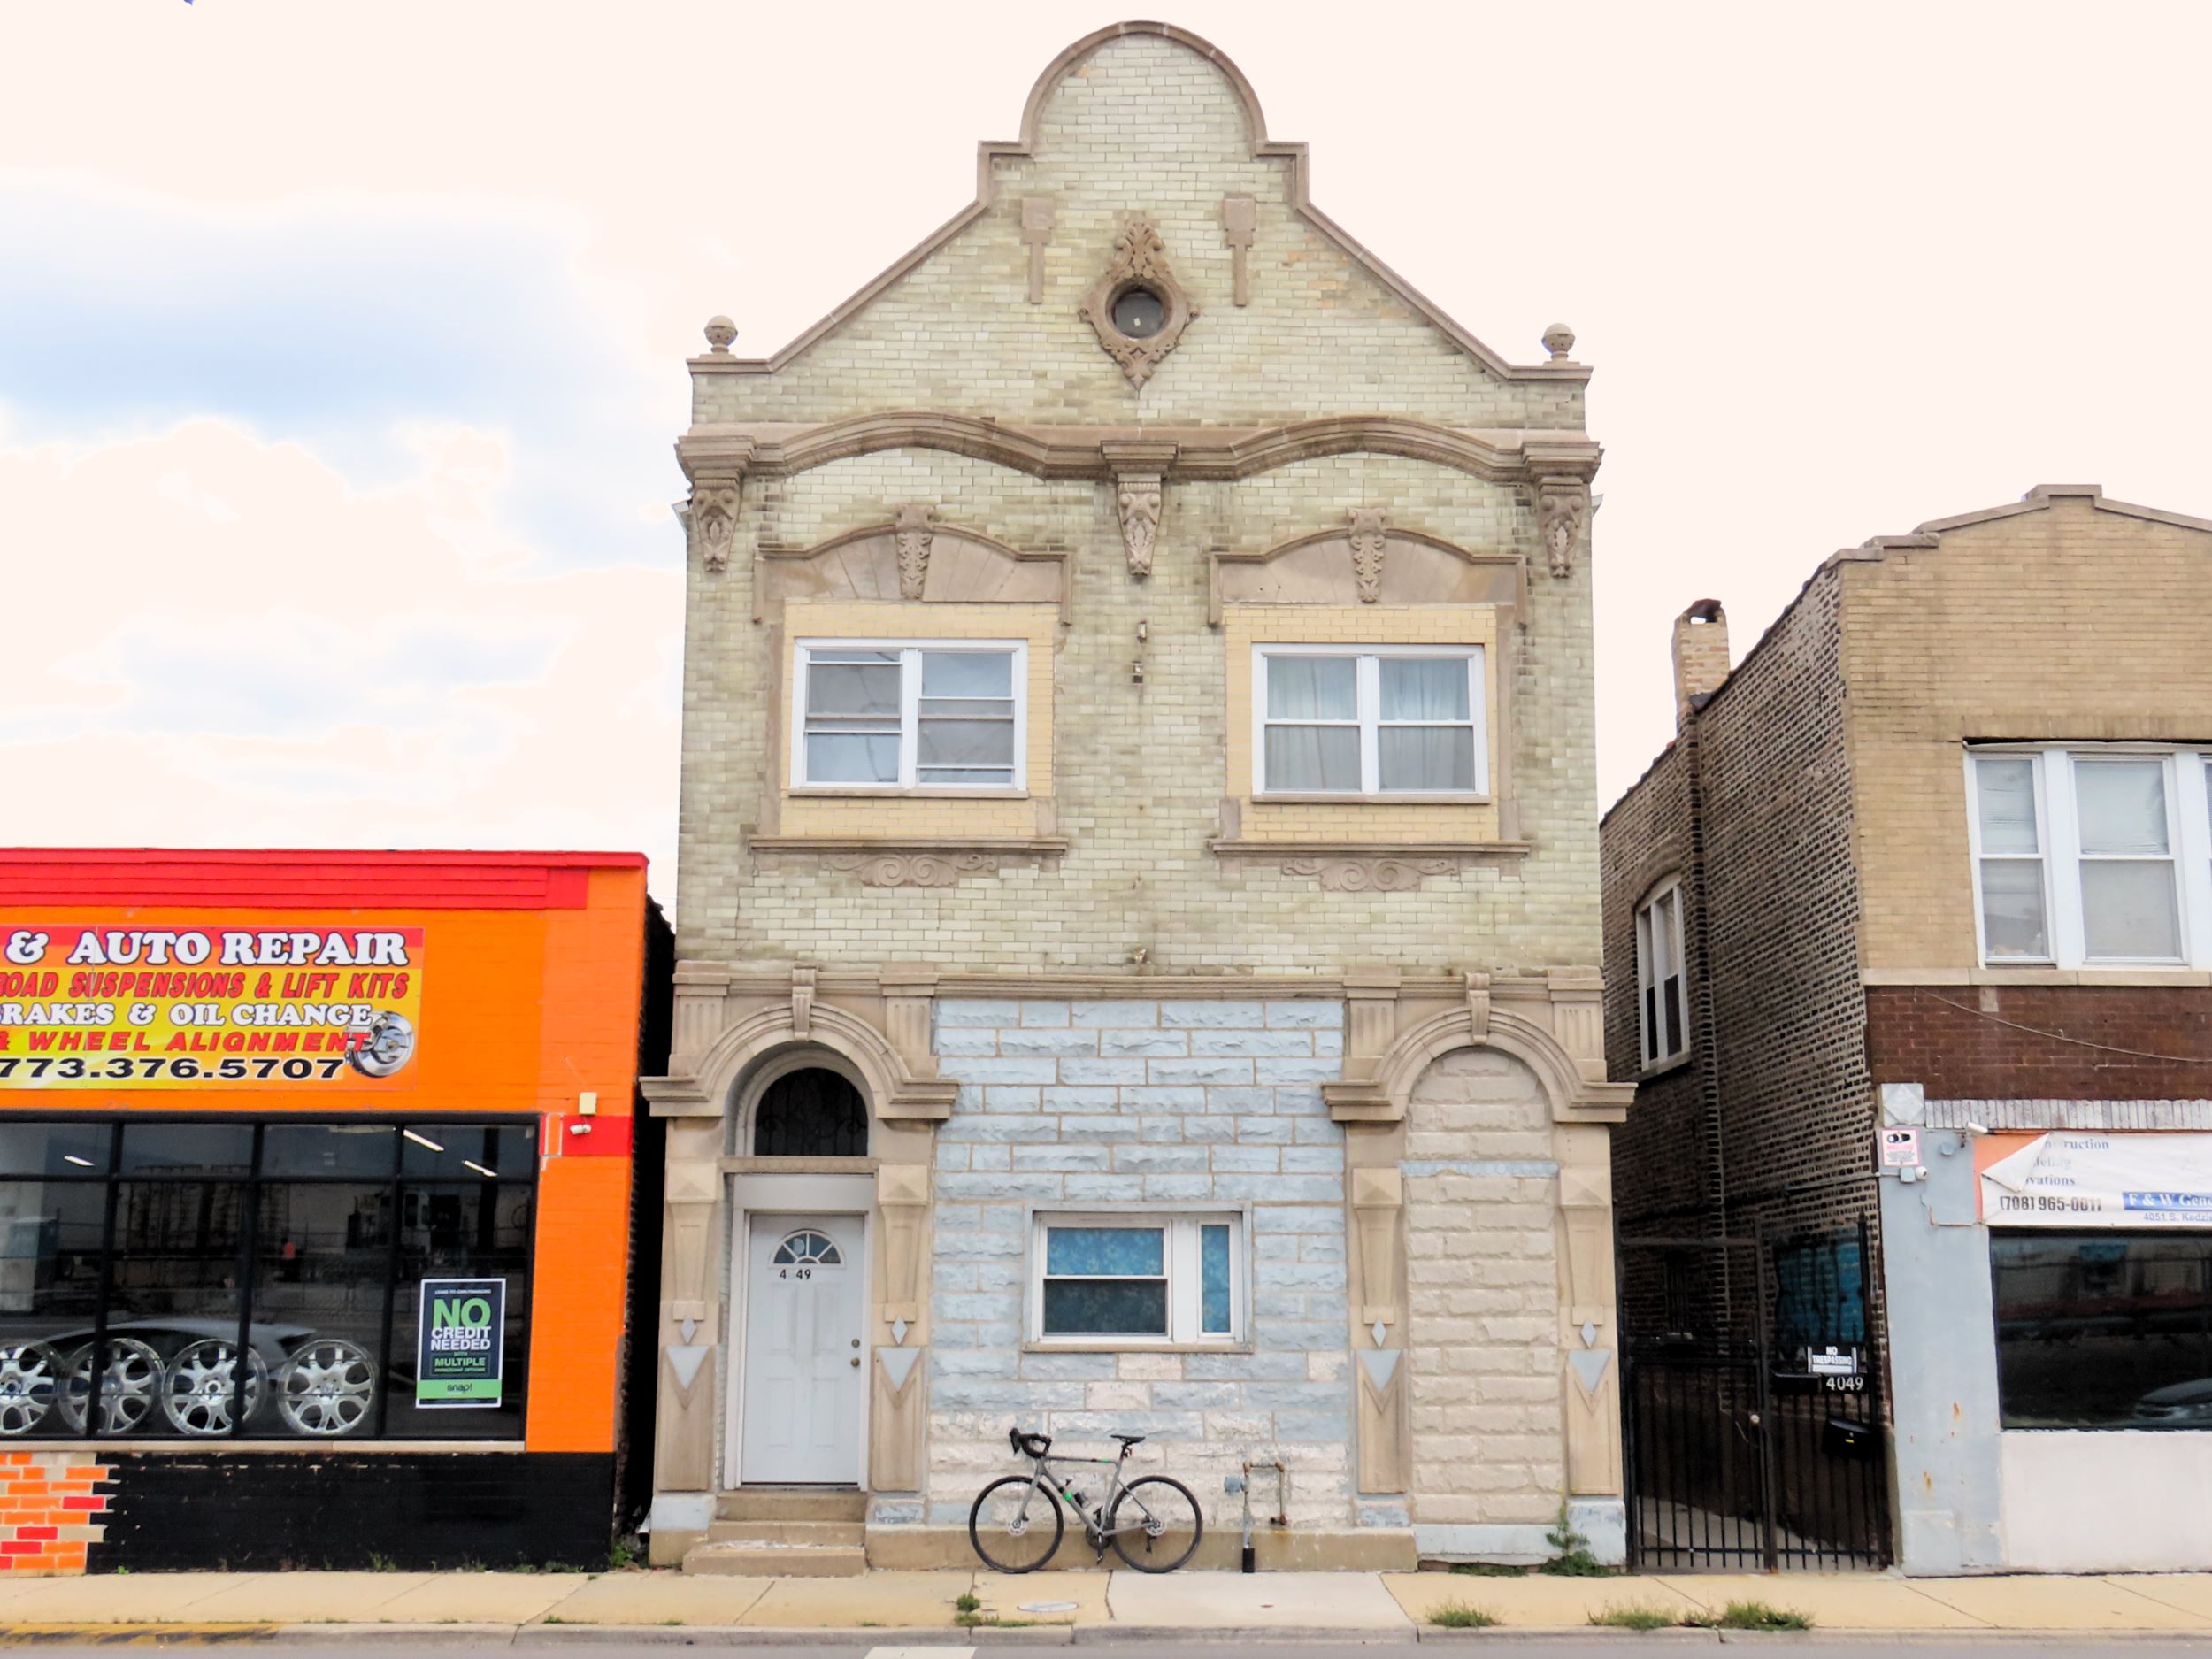 A tour bicycle leaning on the bottom of a pale brick three story storefront and flats with the storefront bricked up with grey block.